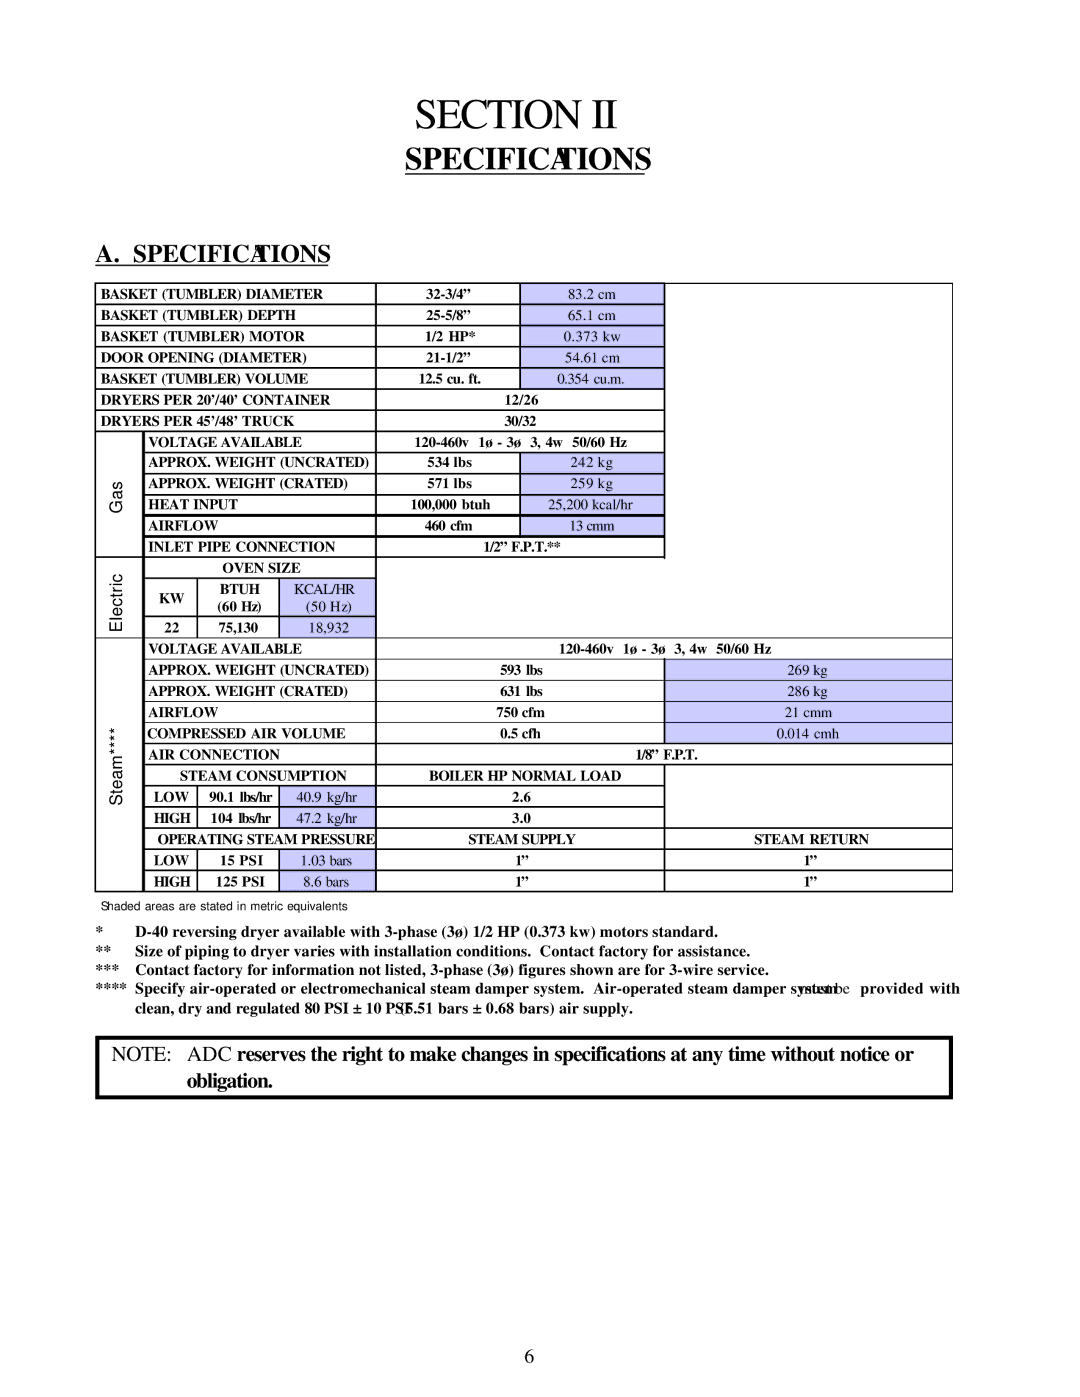 American Dryer Corp D-40 installation manual Specifications 